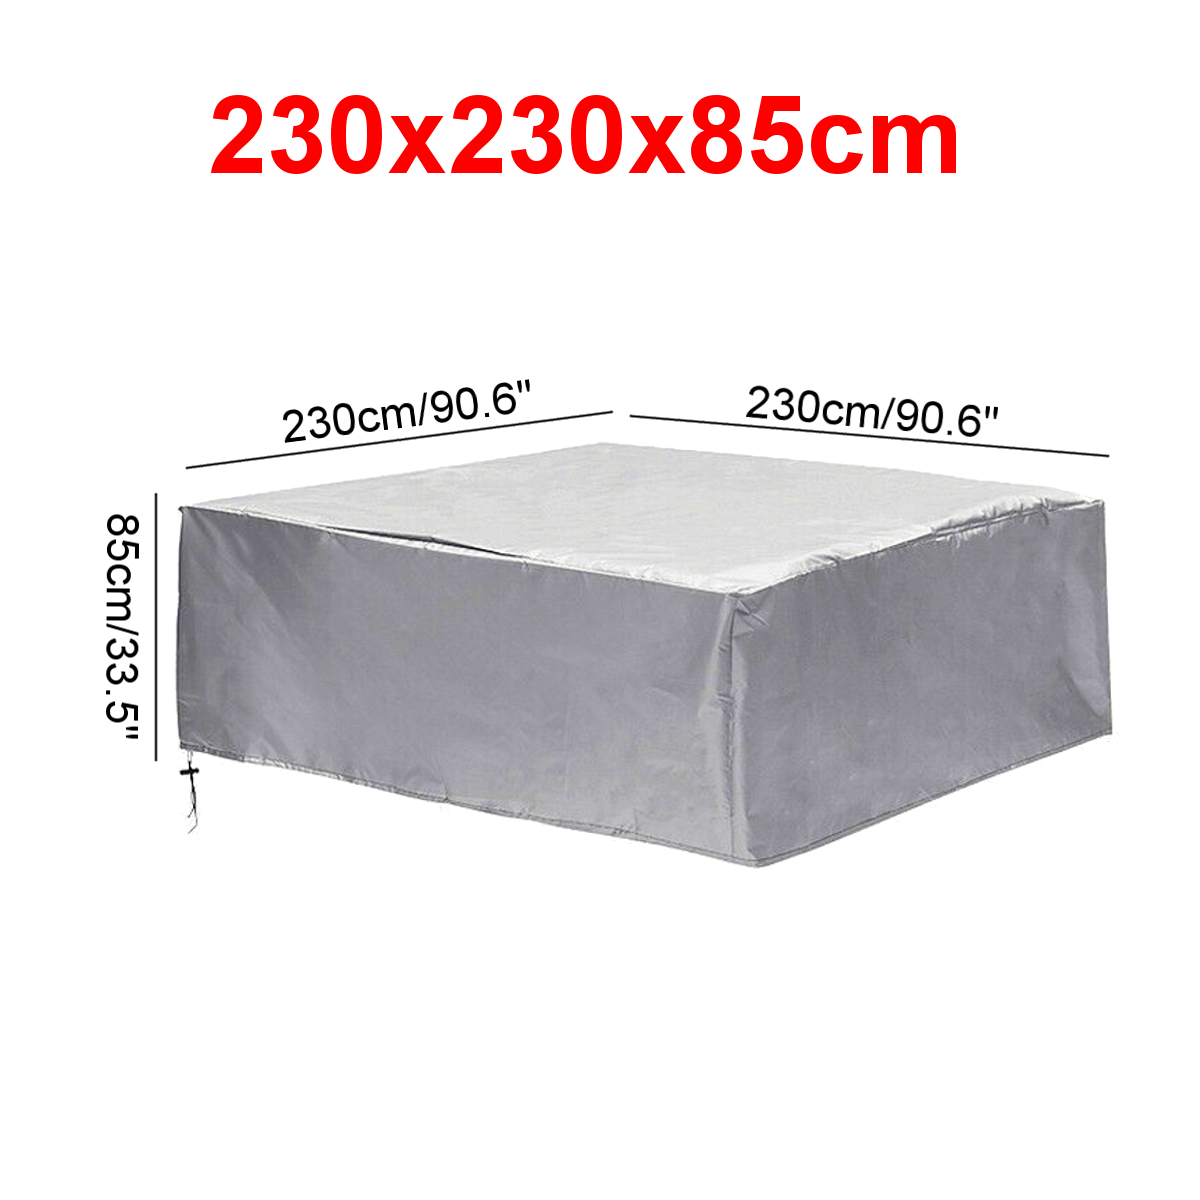 Hot-Tub-Spa-Cover-Cap-Guard-Waterproof-Dust-Protector-Harsh-Weather-1781959-7